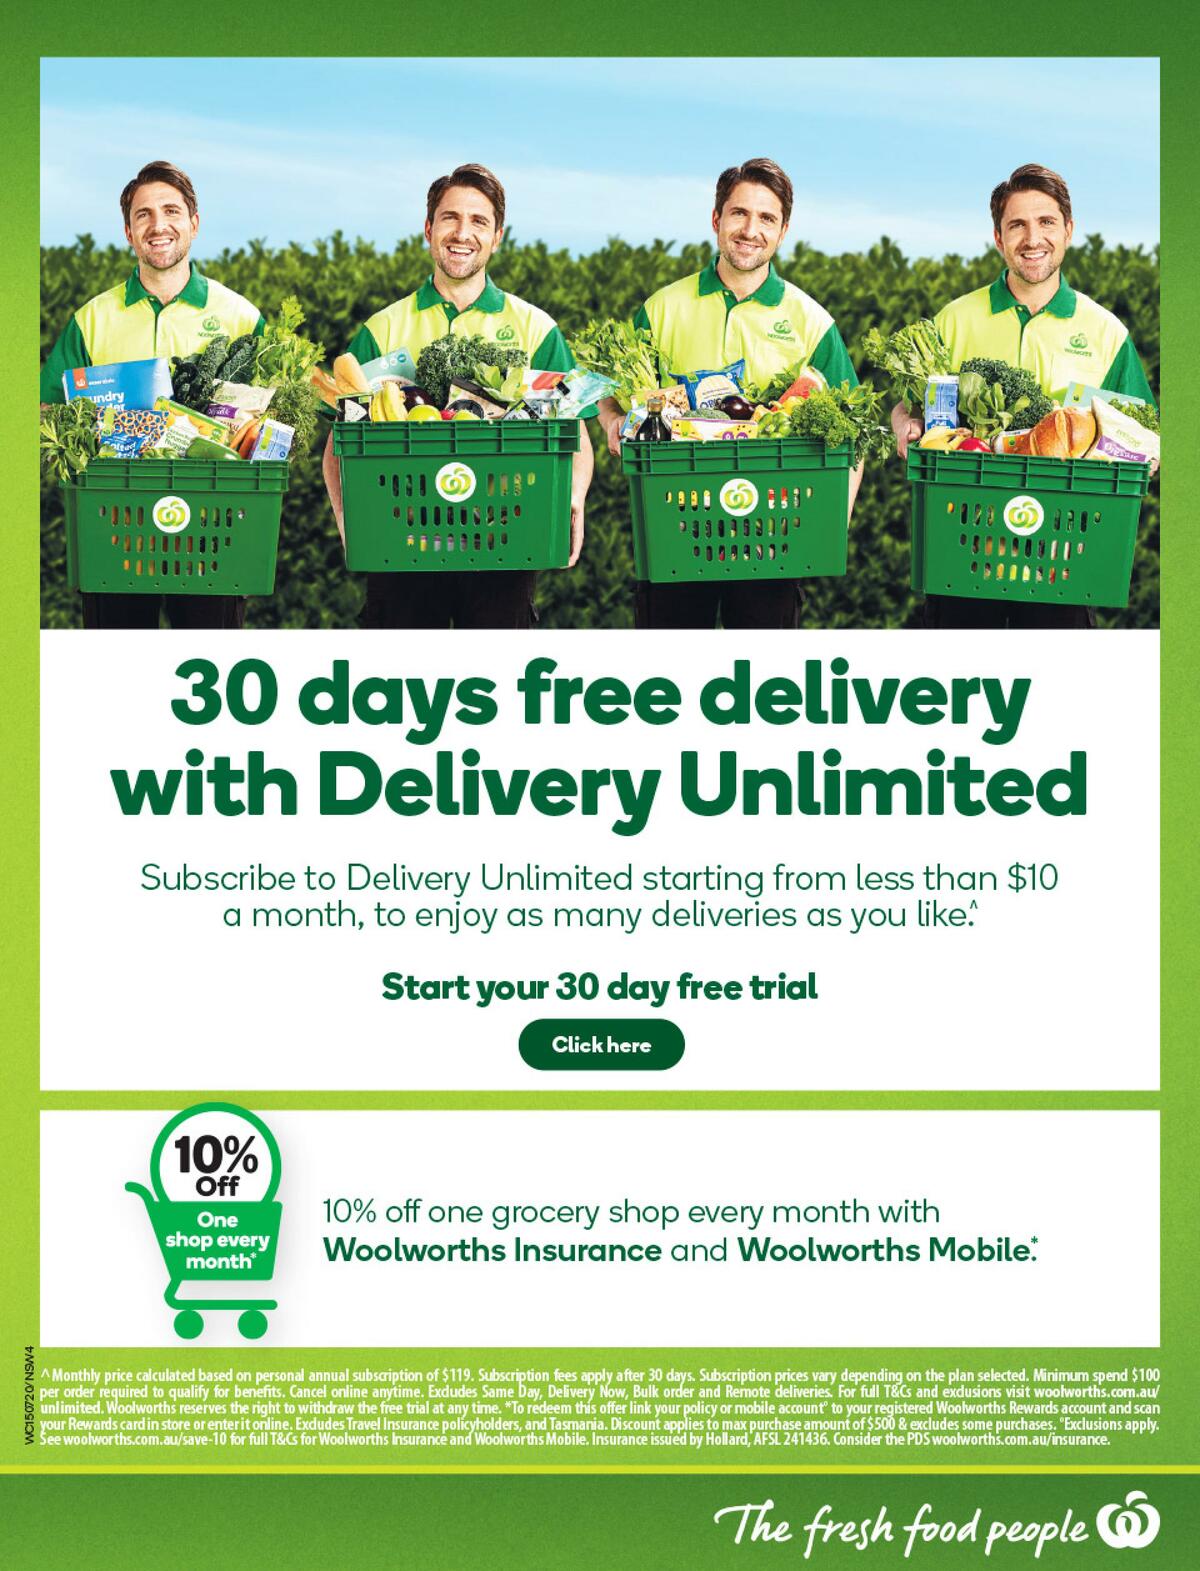 Woolworths Catalogues from 15 July